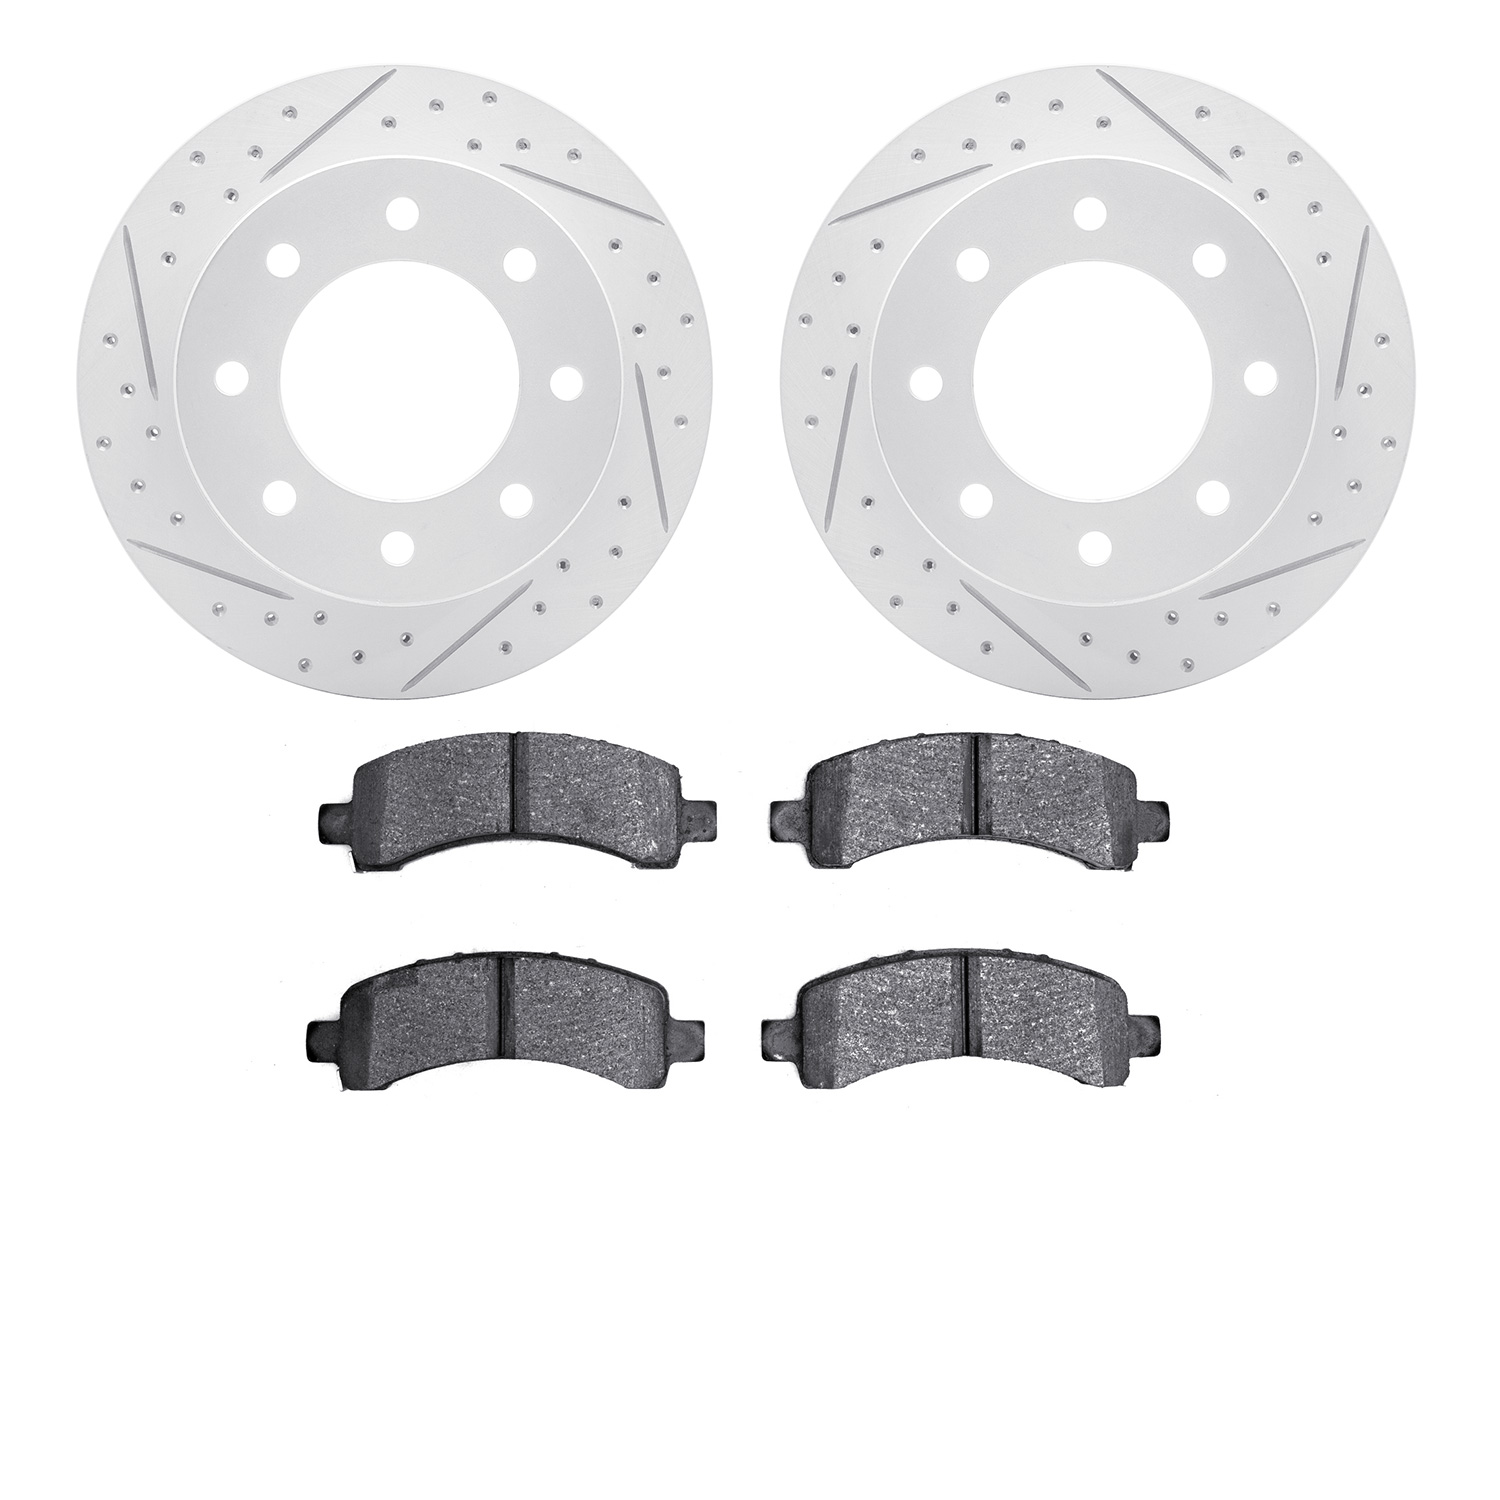 2502-48026 Geoperformance Drilled/Slotted Rotors w/5000 Advanced Brake Pads Kit, 2018-2020 GM, Position: Rear